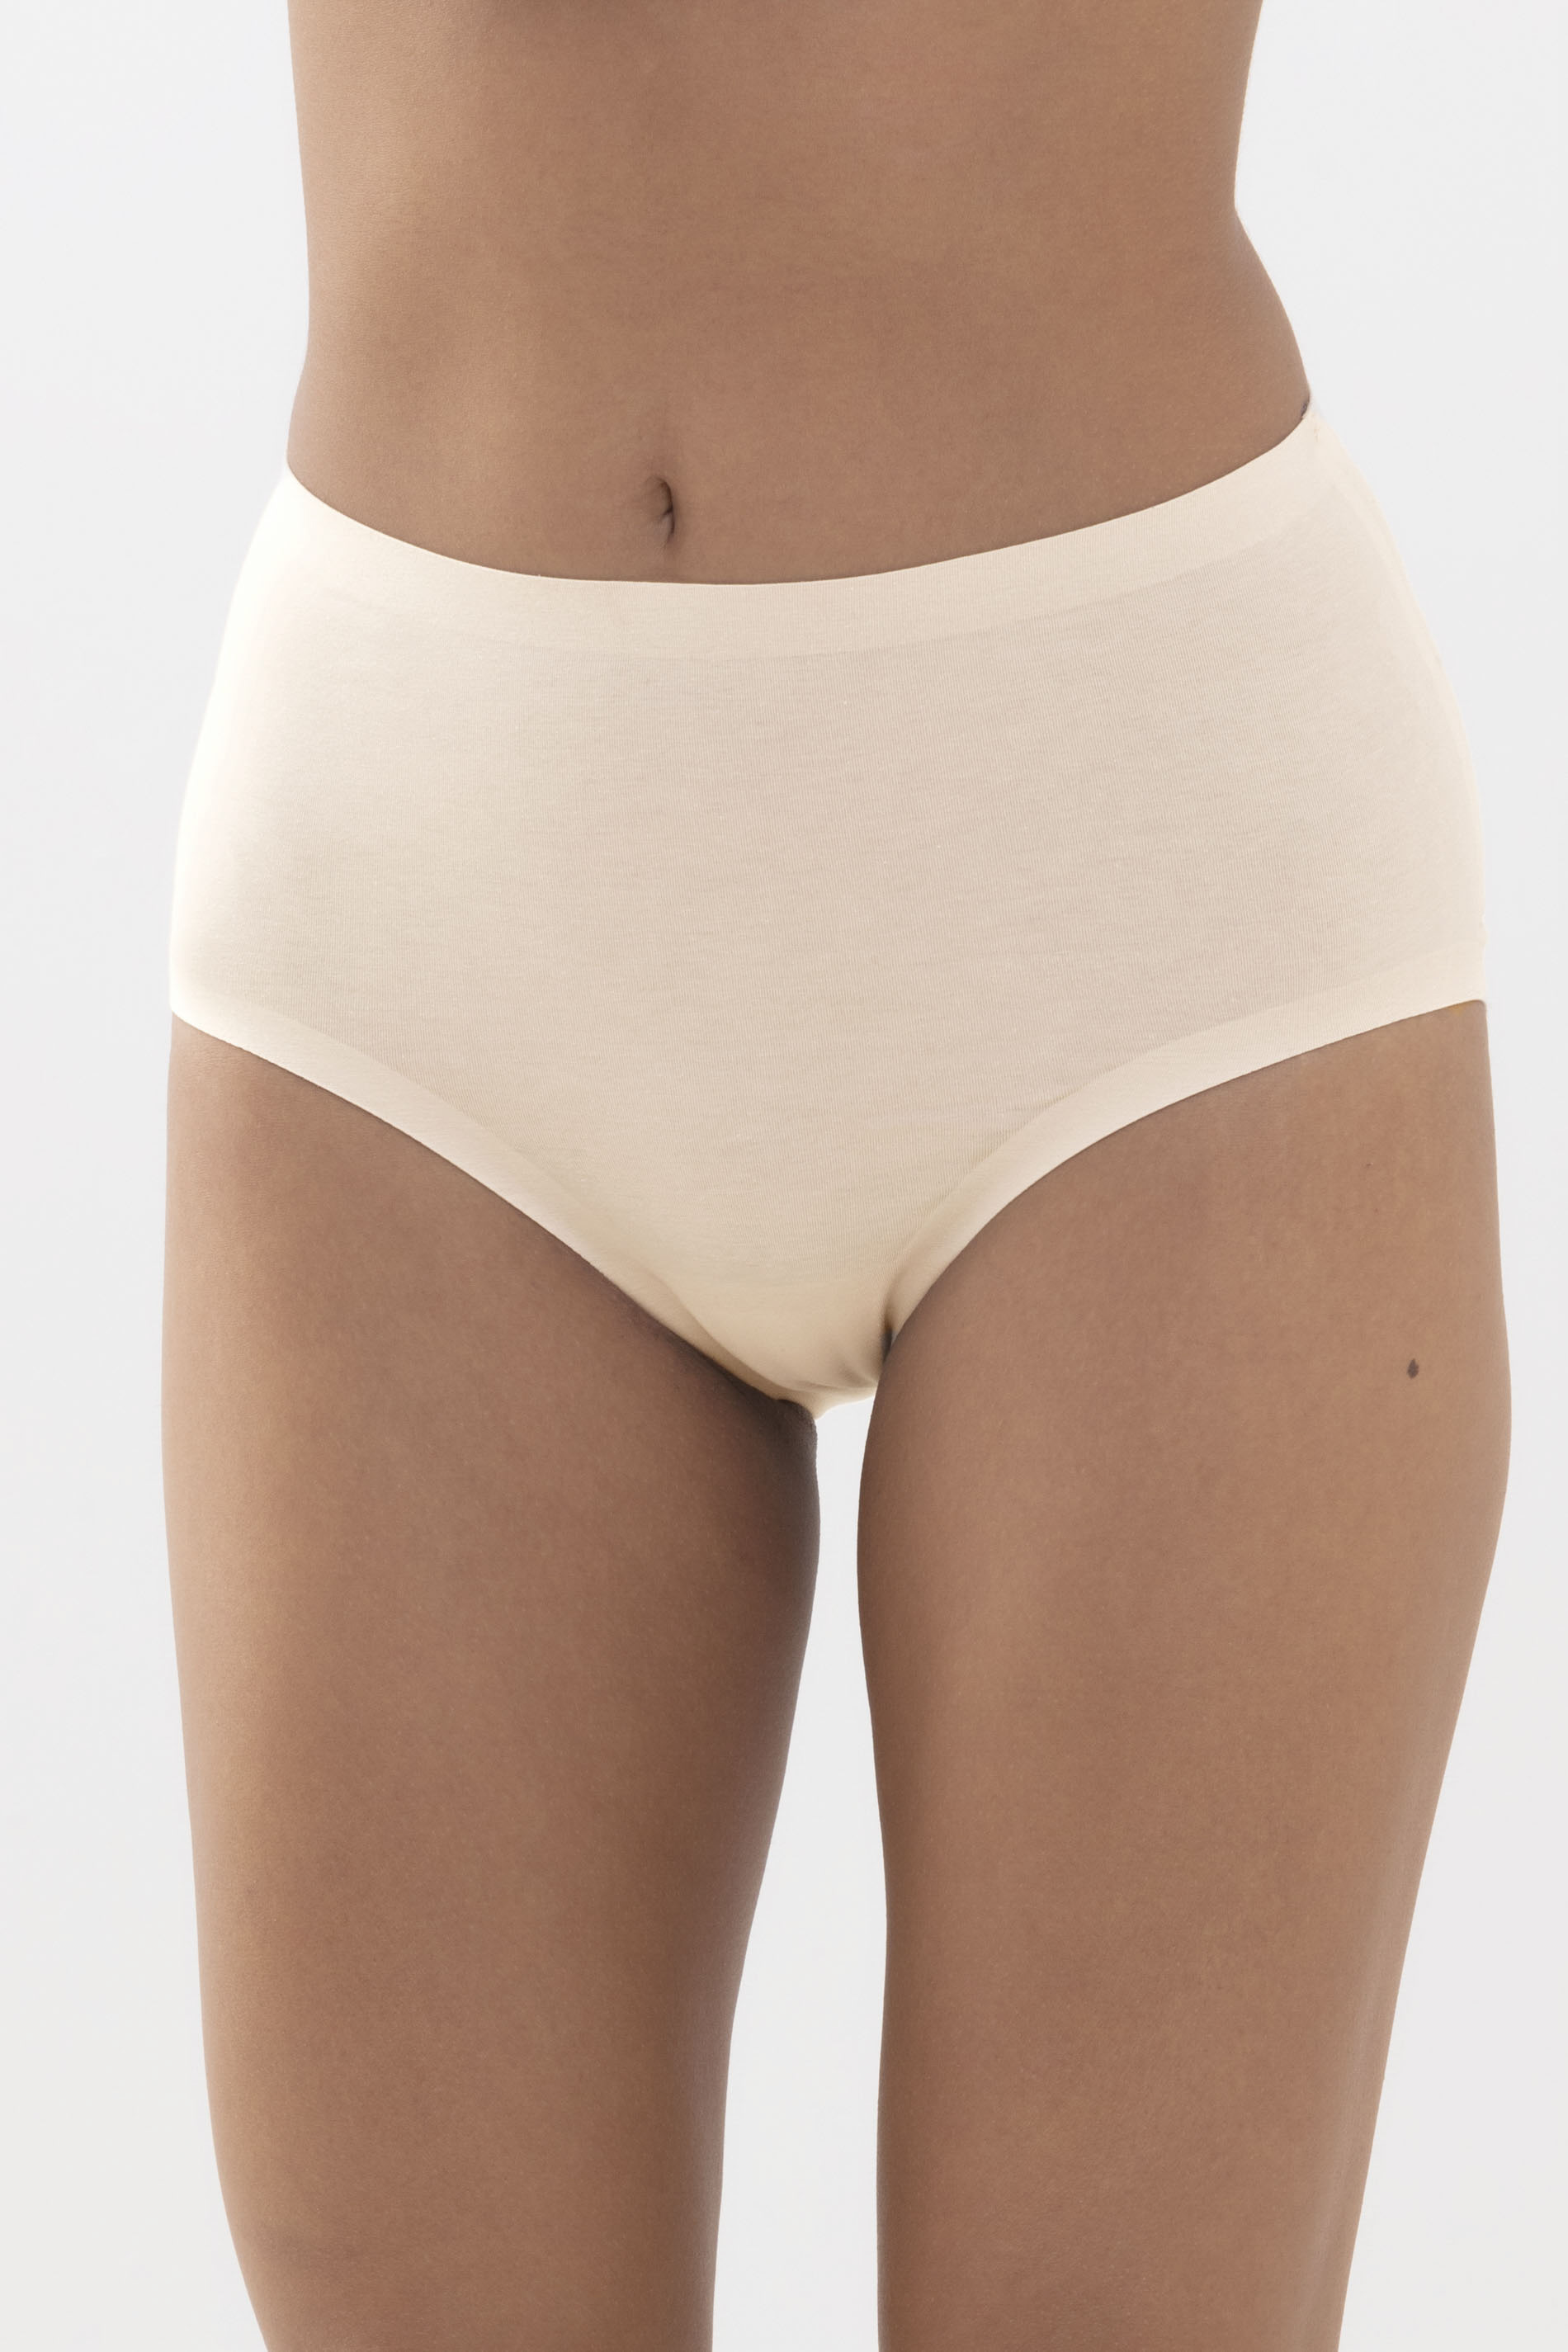 Taillen-Slip New Pearl Serie Natural Second me Frontansicht | mey®